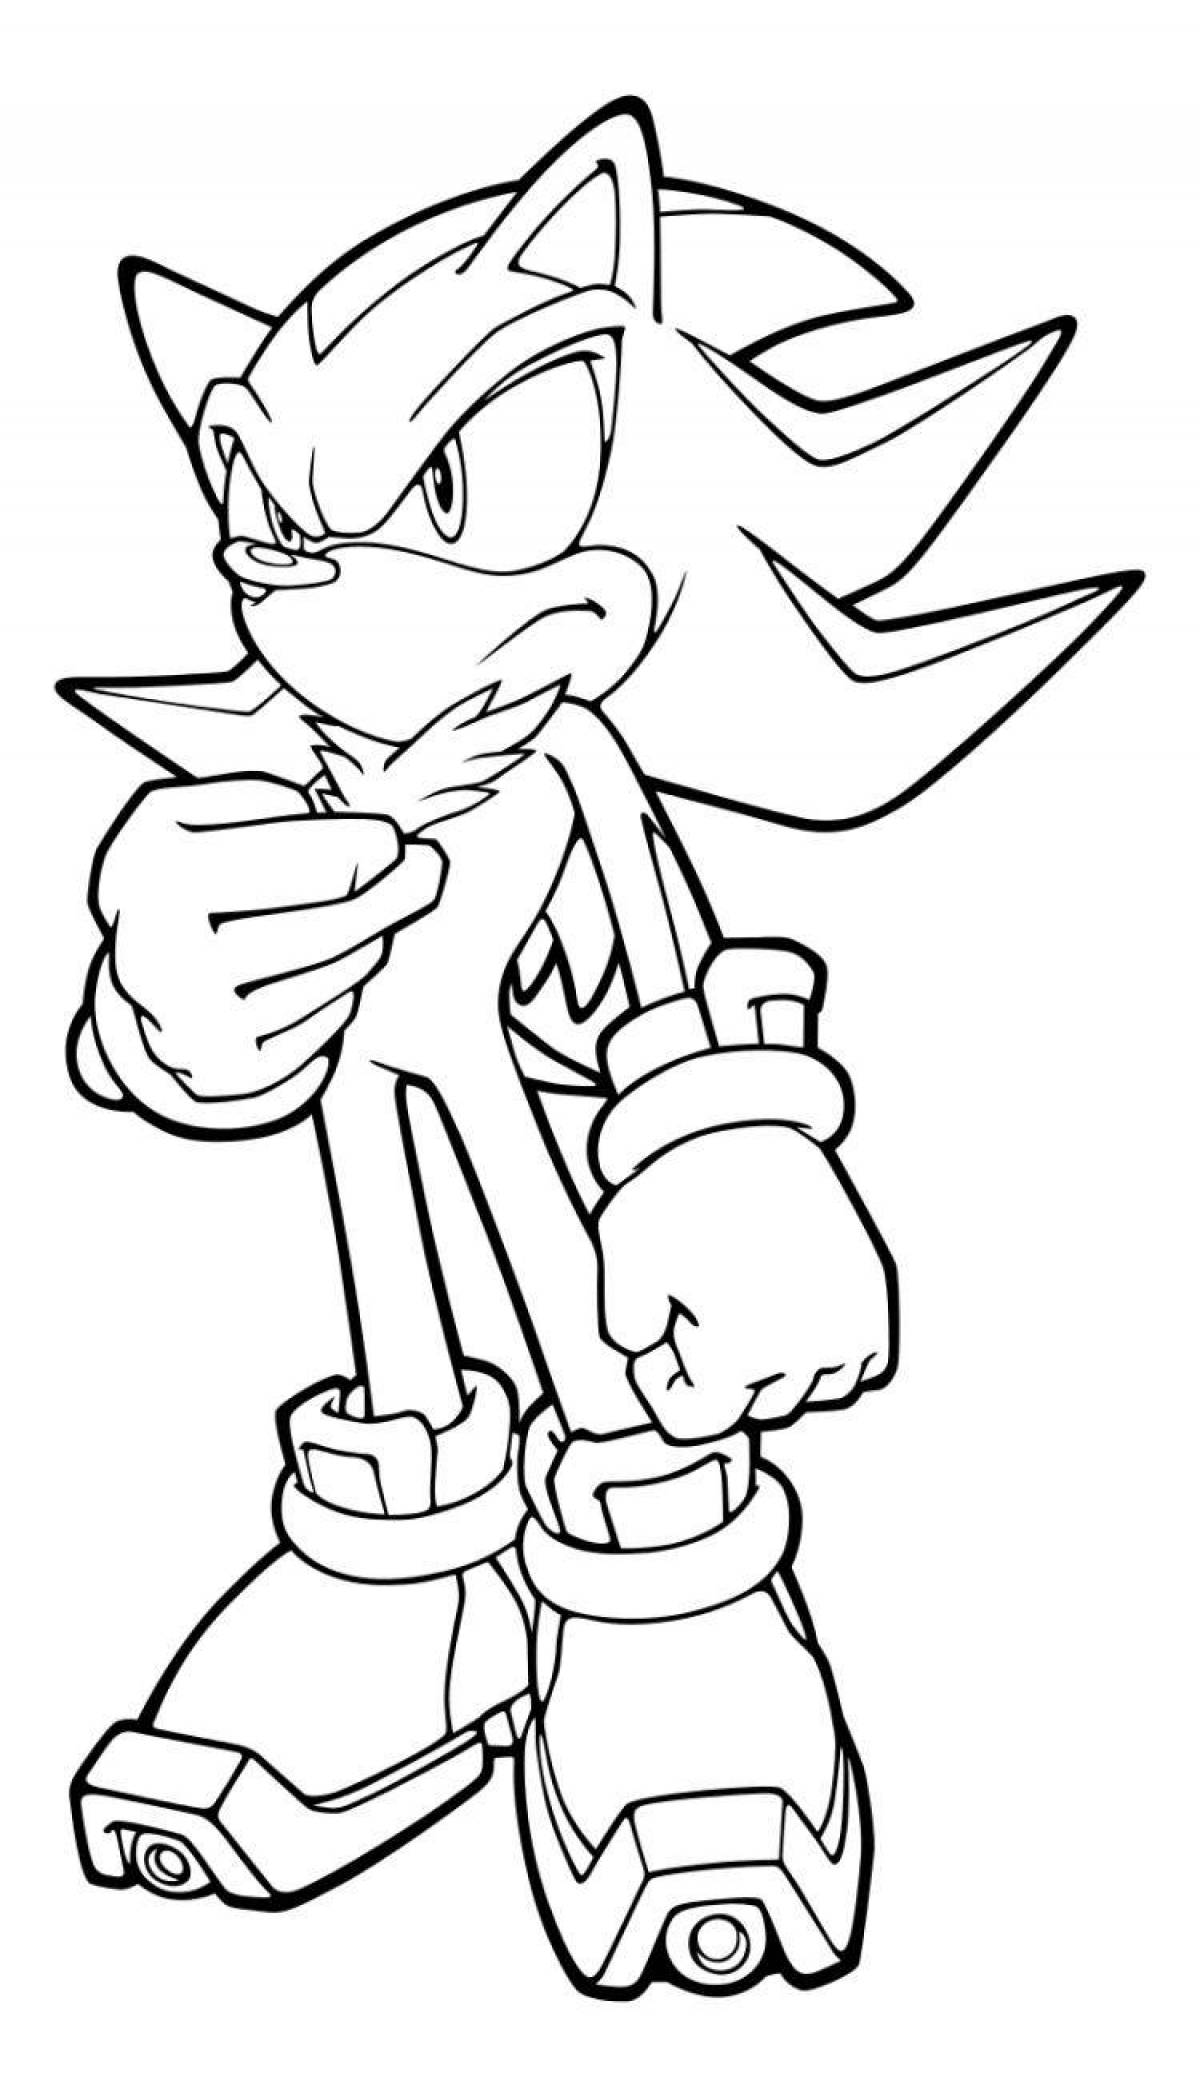 Playful coloring black sonic